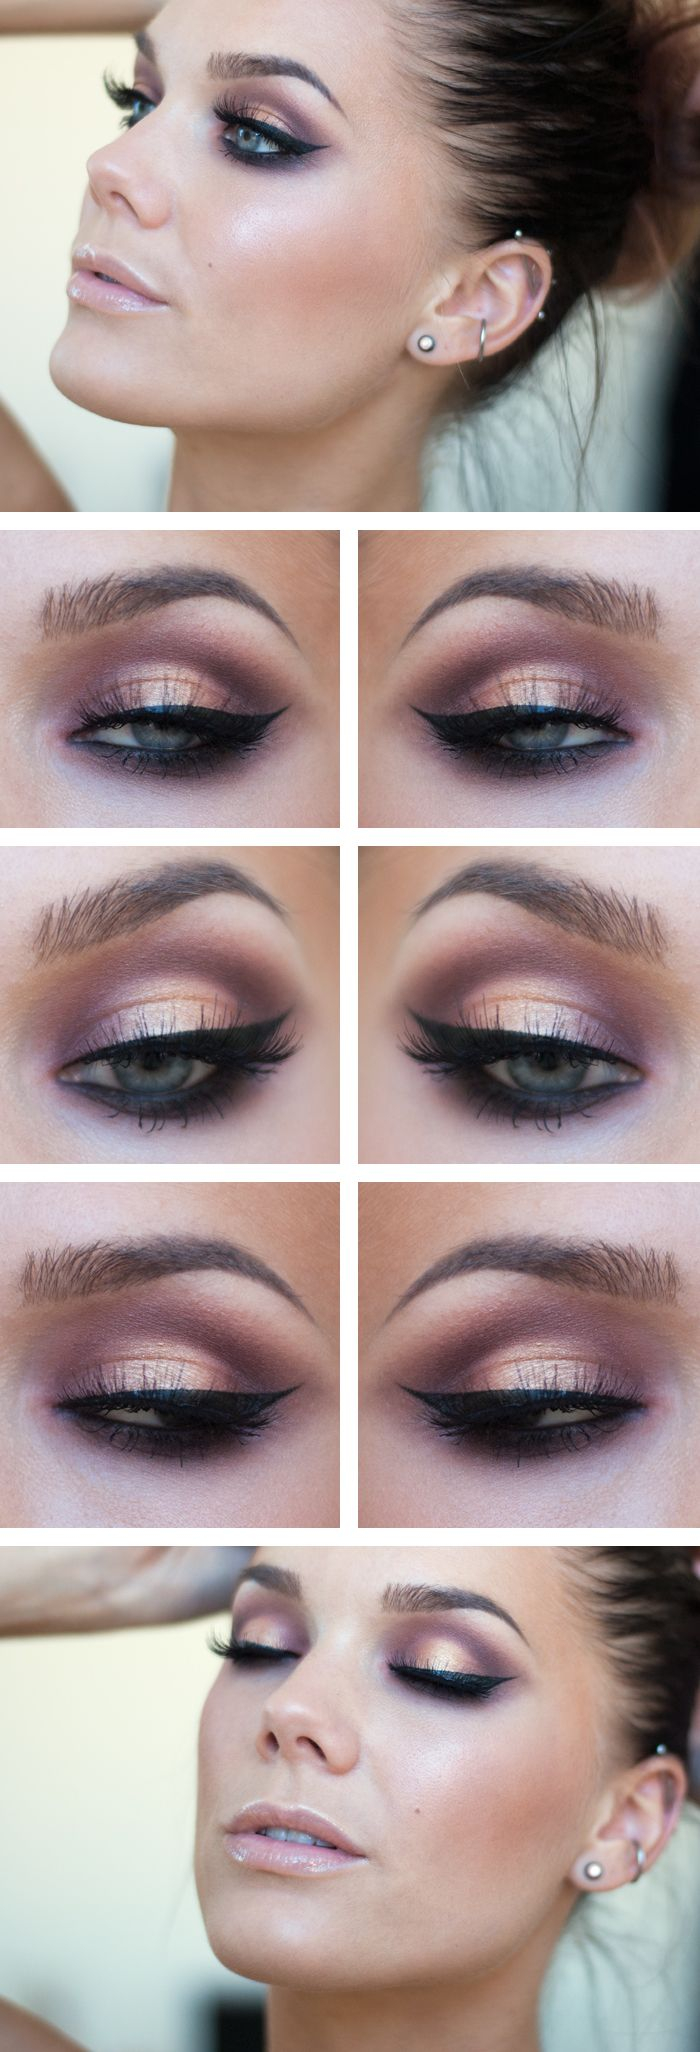 Pretty Light Eye Makeup Simple Yet Stylish Light Makeup Ideas To Try For Daily Occasions